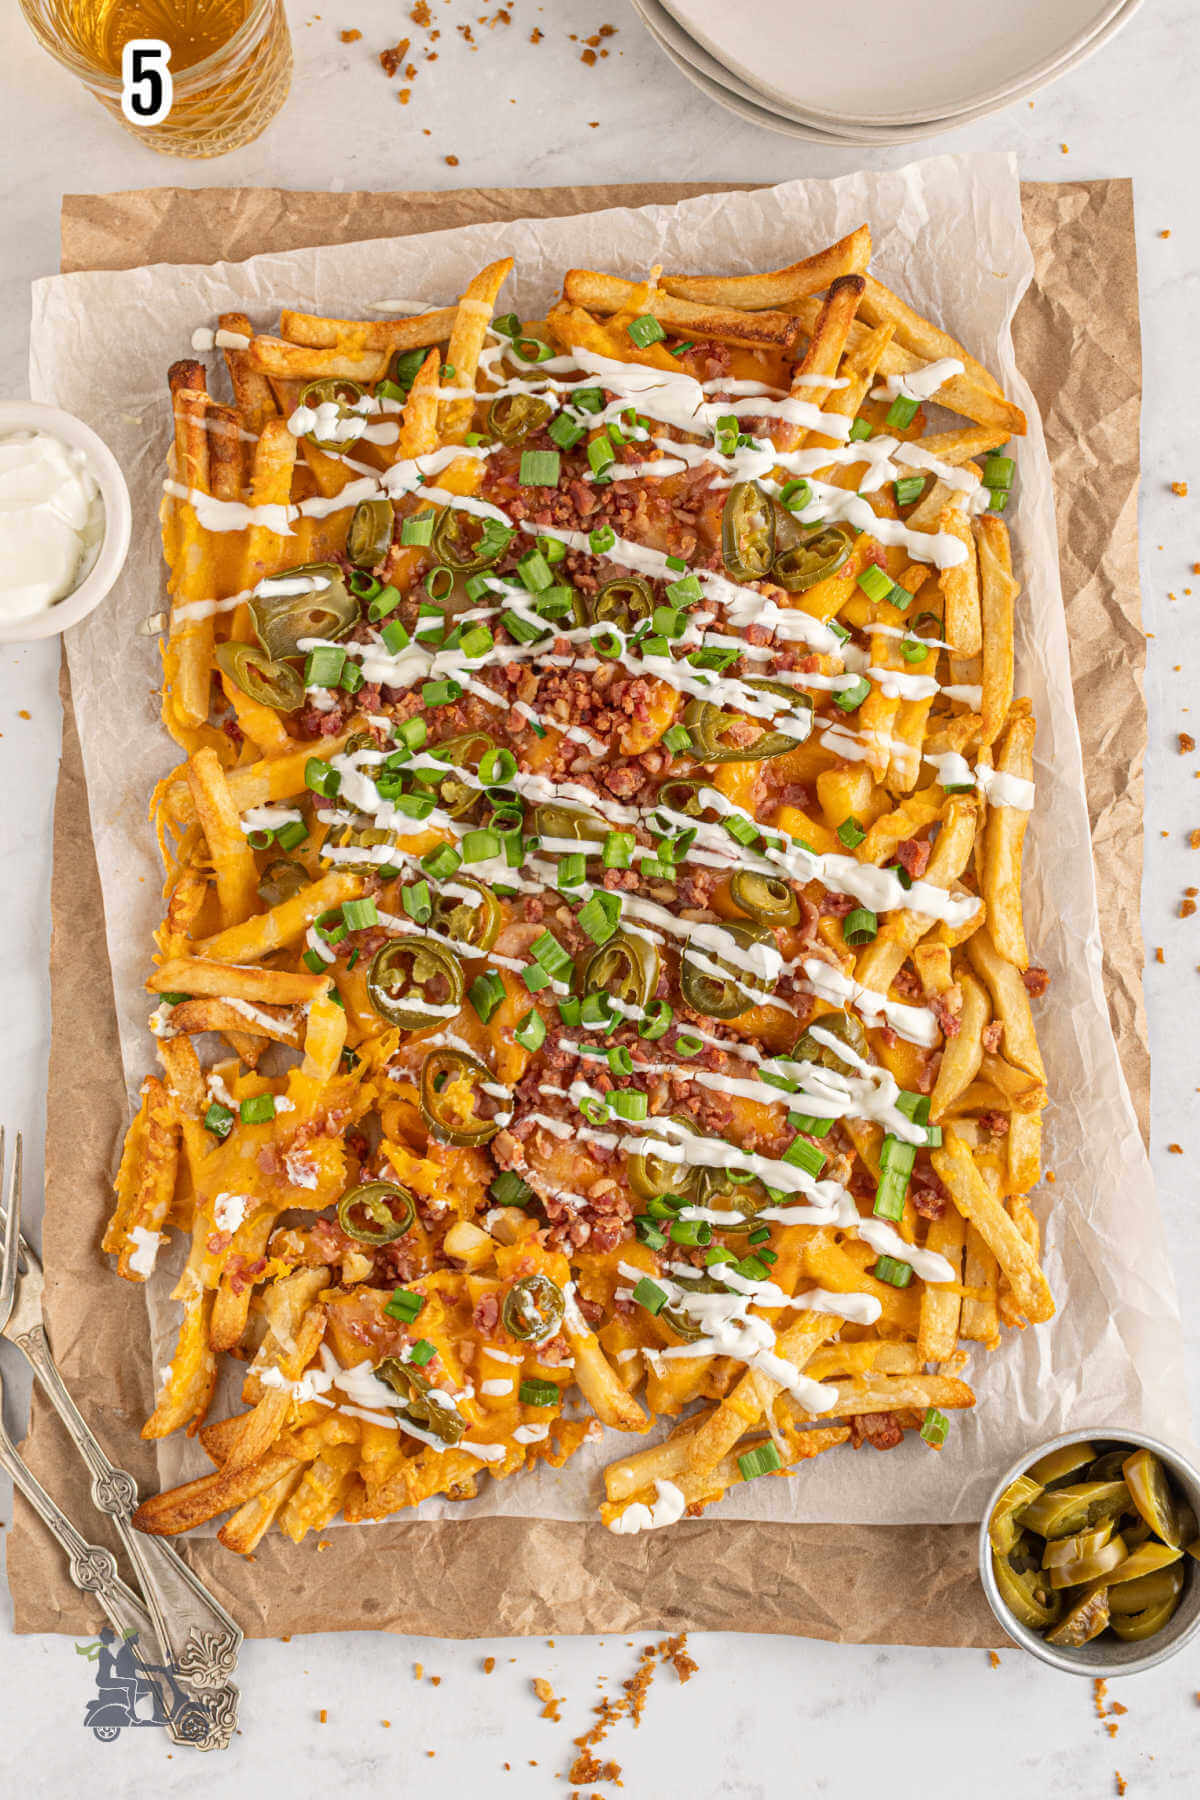 The finished baked loaded french fries topped with sour cream and green onions. 